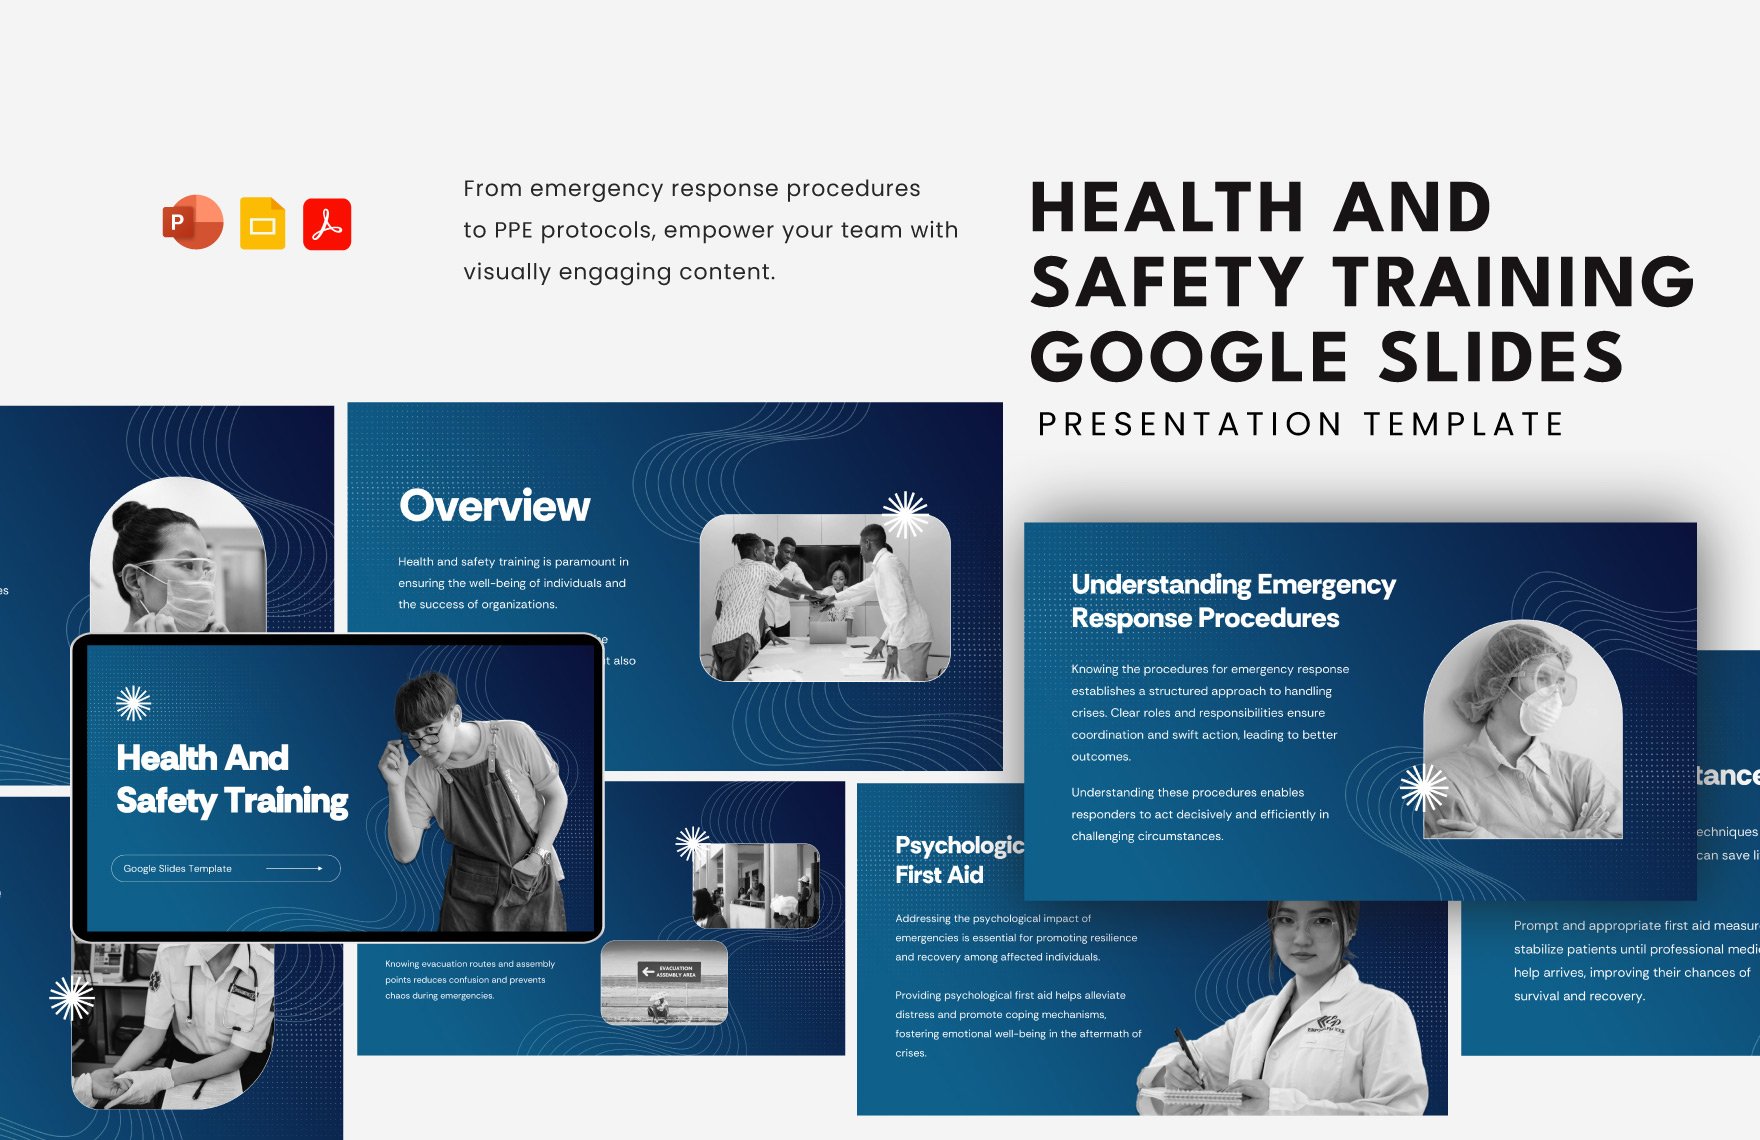 Health and Safety Training Google Slides Template